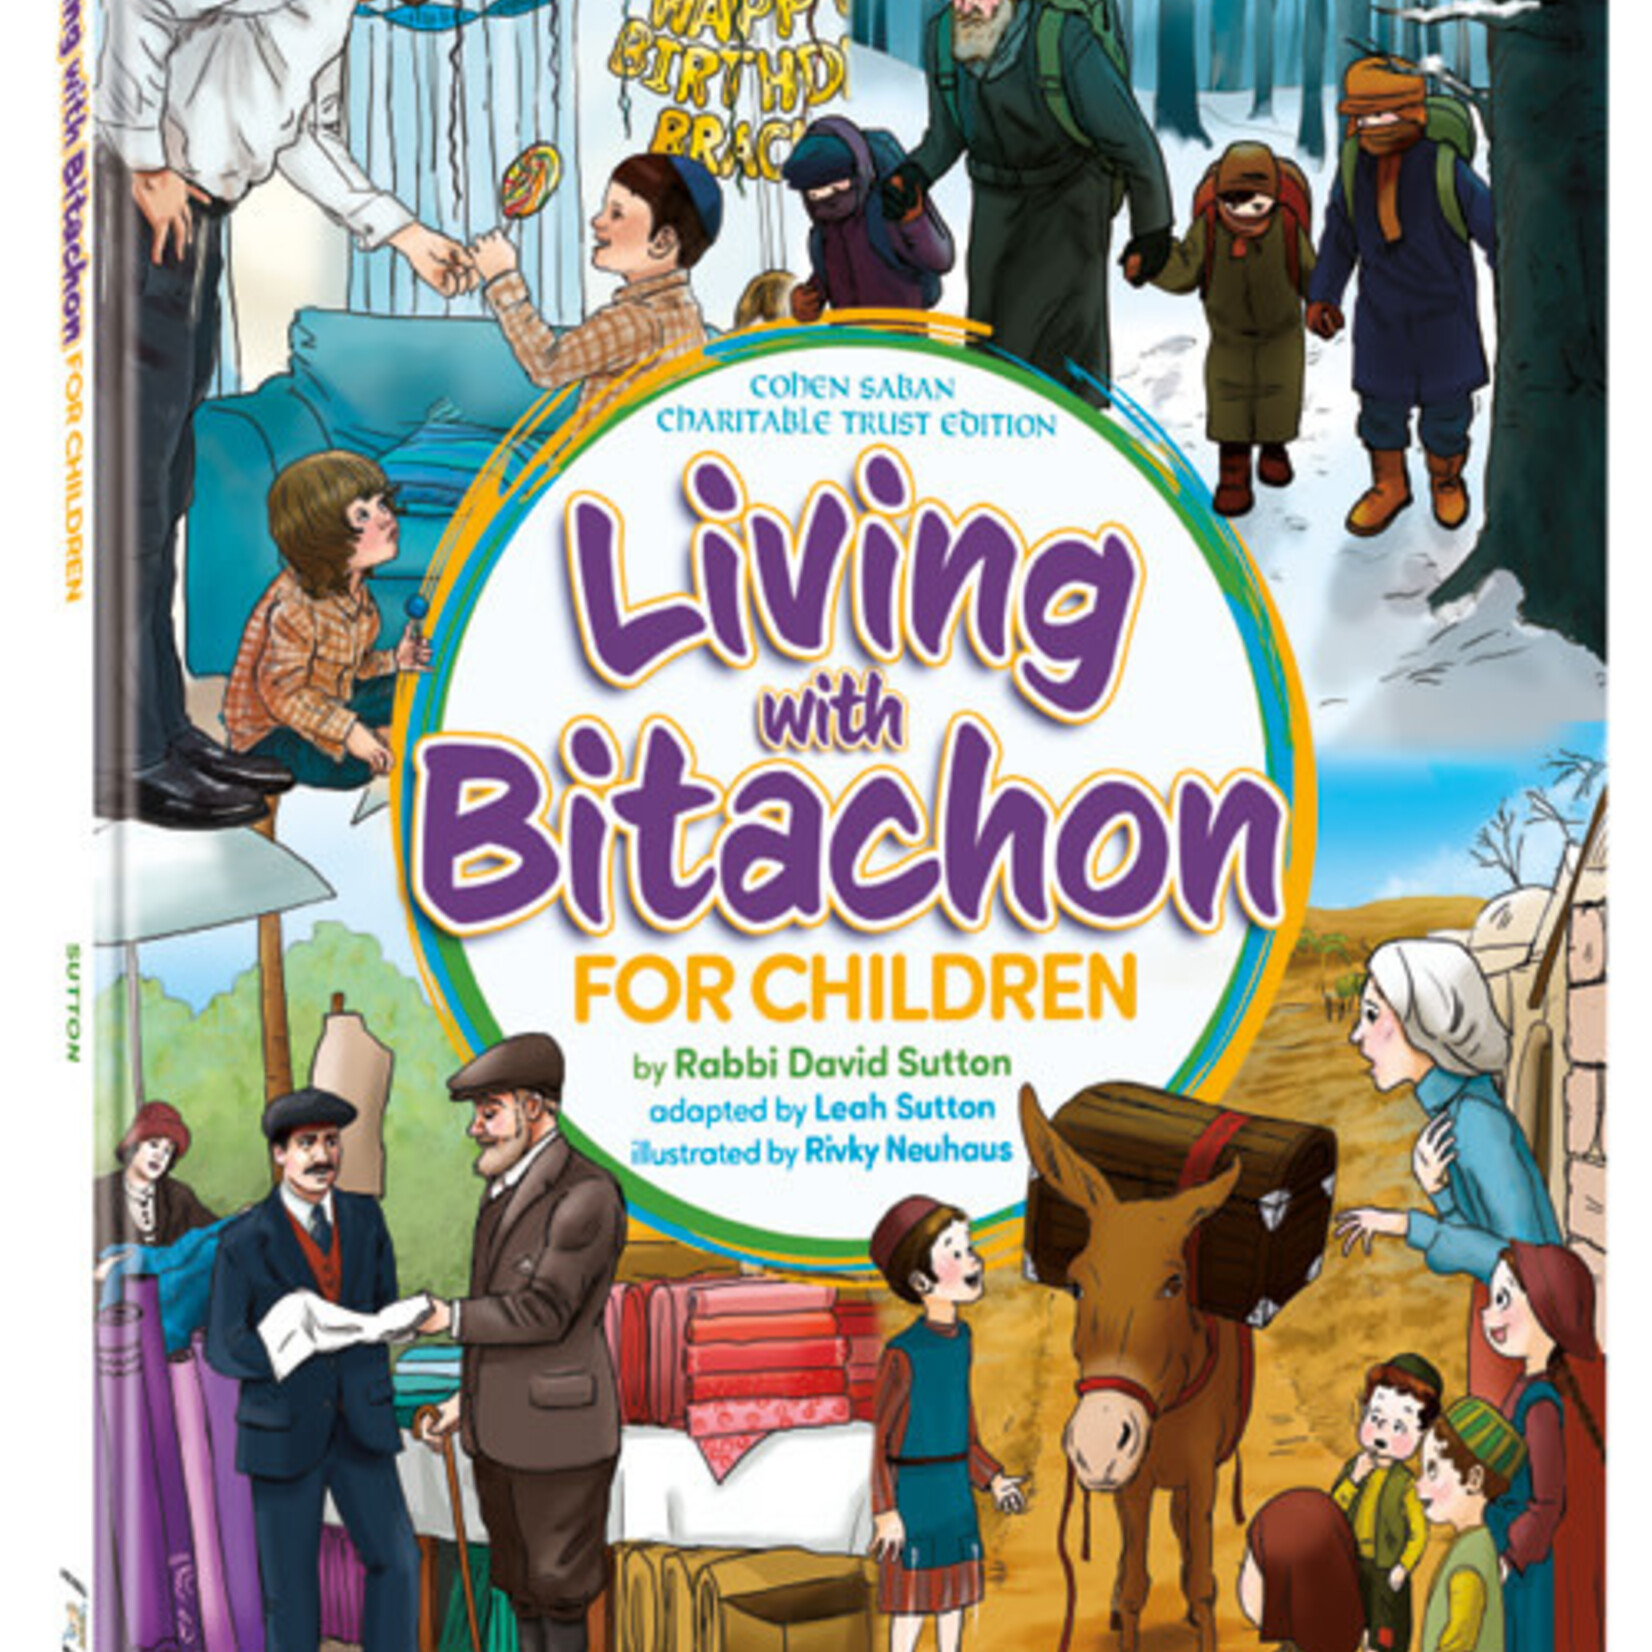 Living With Bitachon for Children